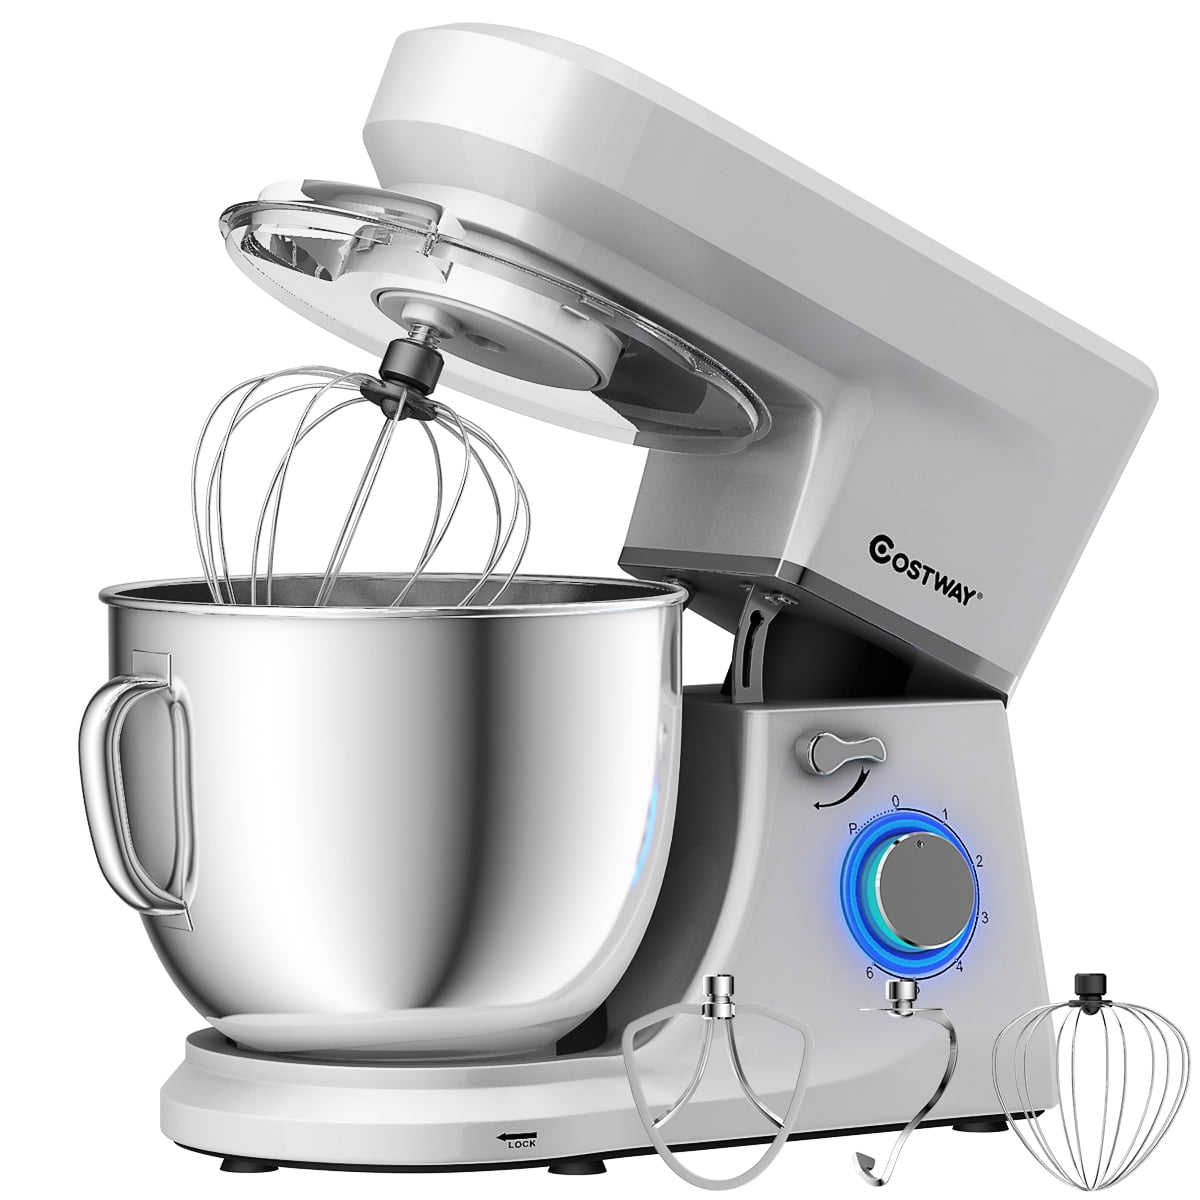 VEVOR 5 in 1 Stand Mixer, 660W Tilt-Head Multifunctional Electric Mixer with 6 Speeds LCD Screen Timing, 7.4 qt Stainless Bowl